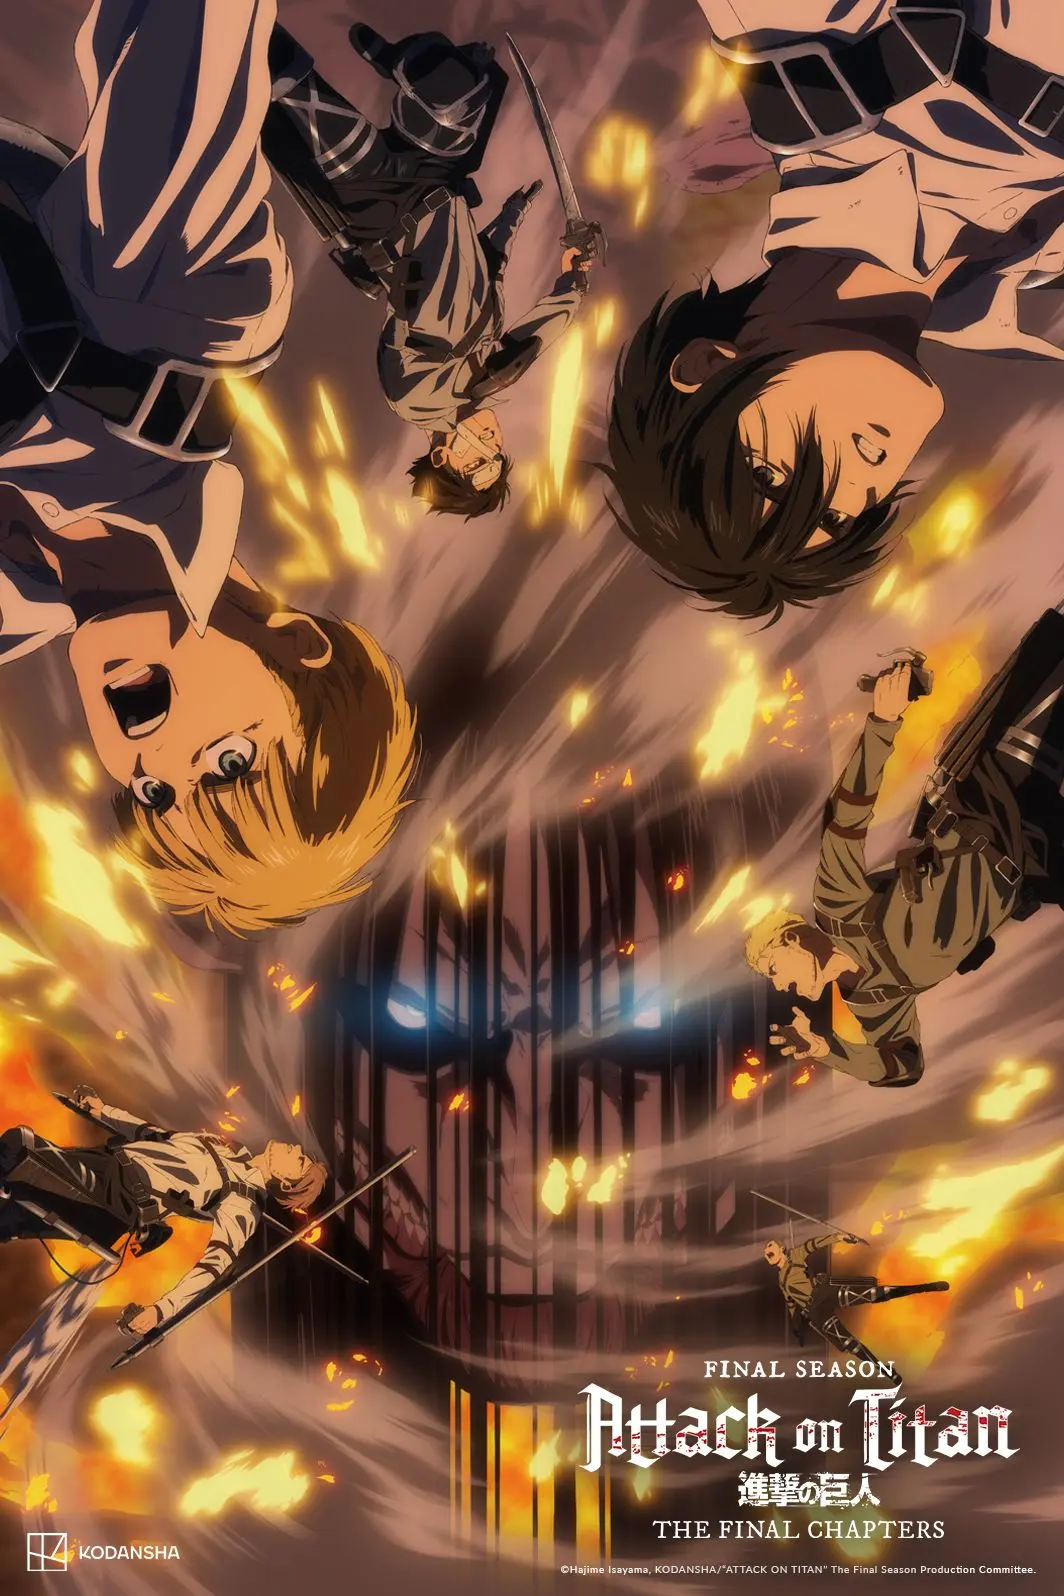 What Is 'Attack on Titan: The Final Chapters Special 2's English